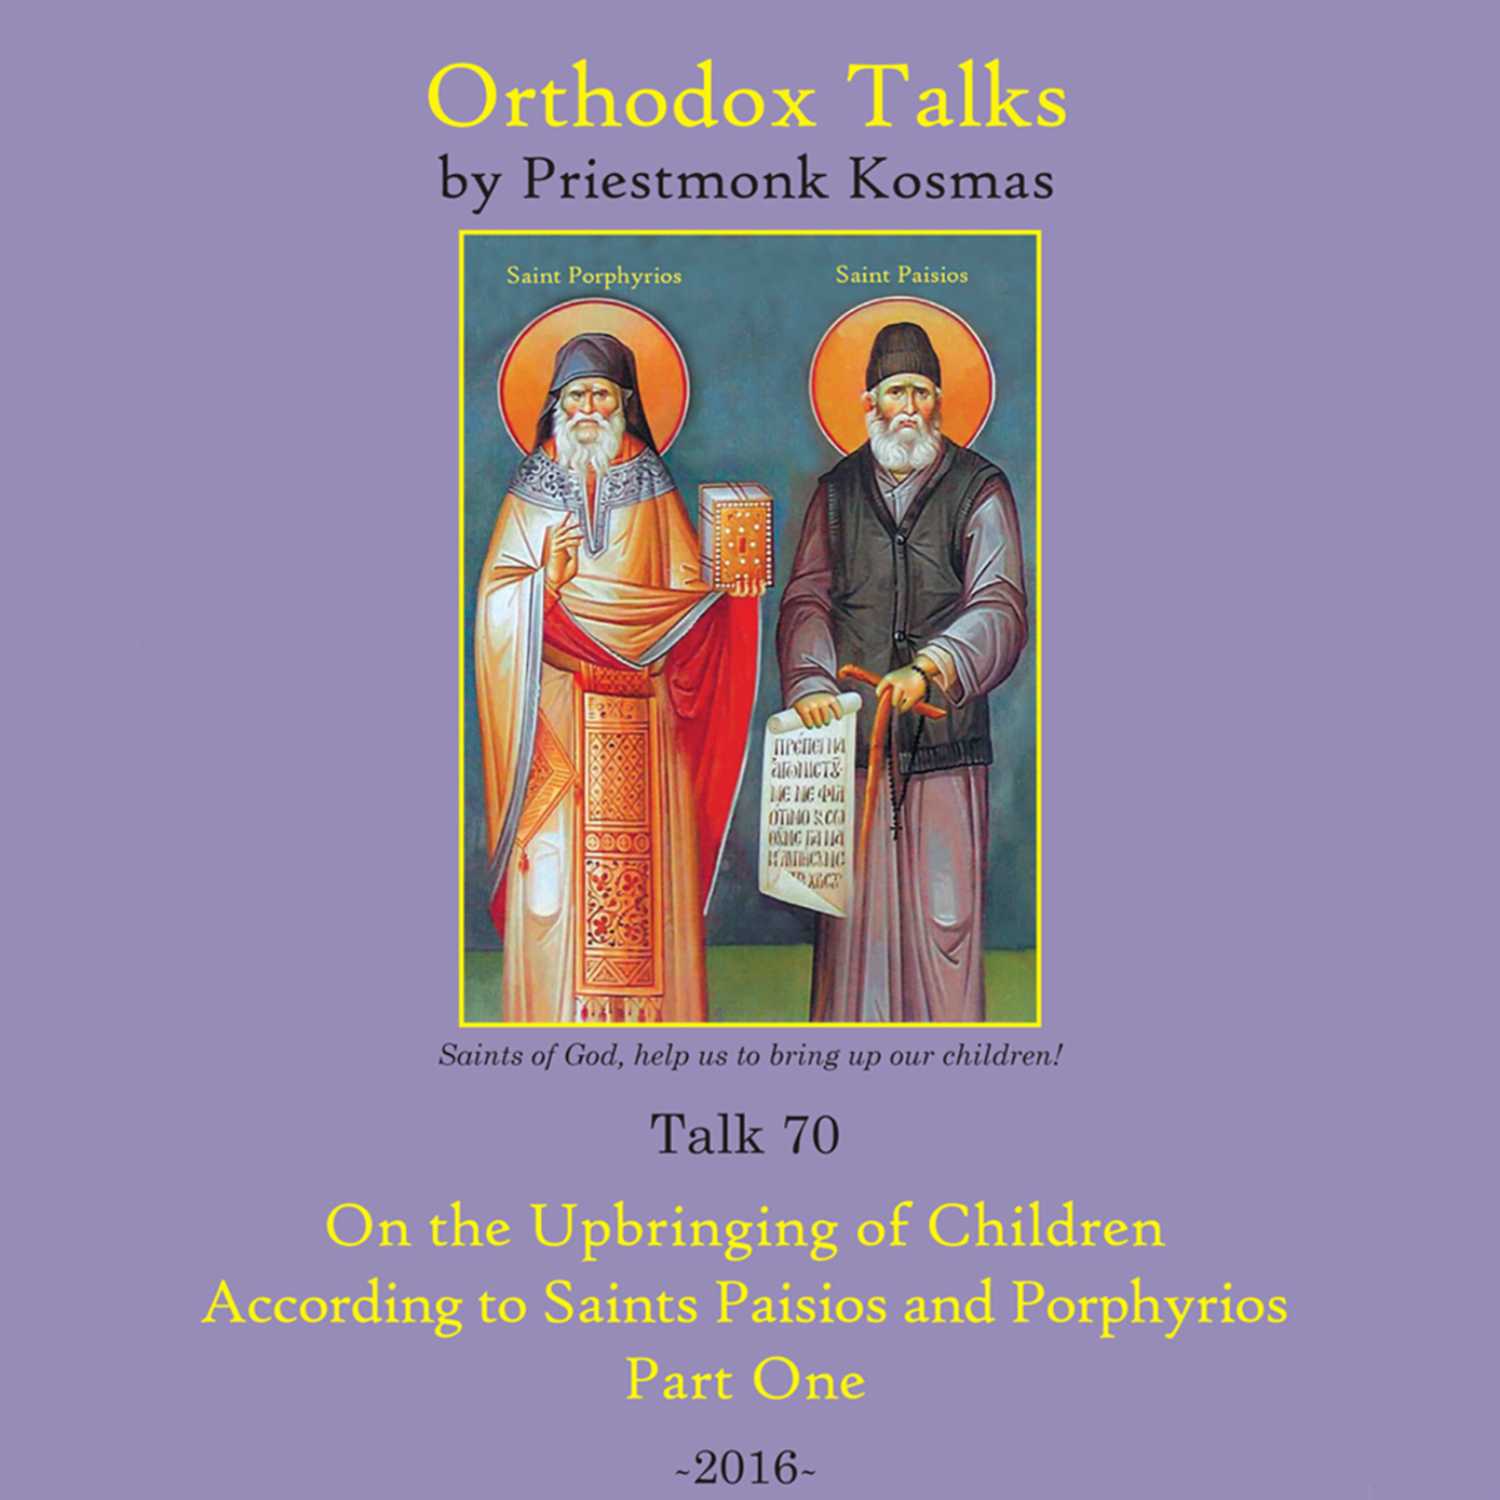 Talk 70: On the Upbringing of Children According to Saints Paisios and Porphyrios - Part 1